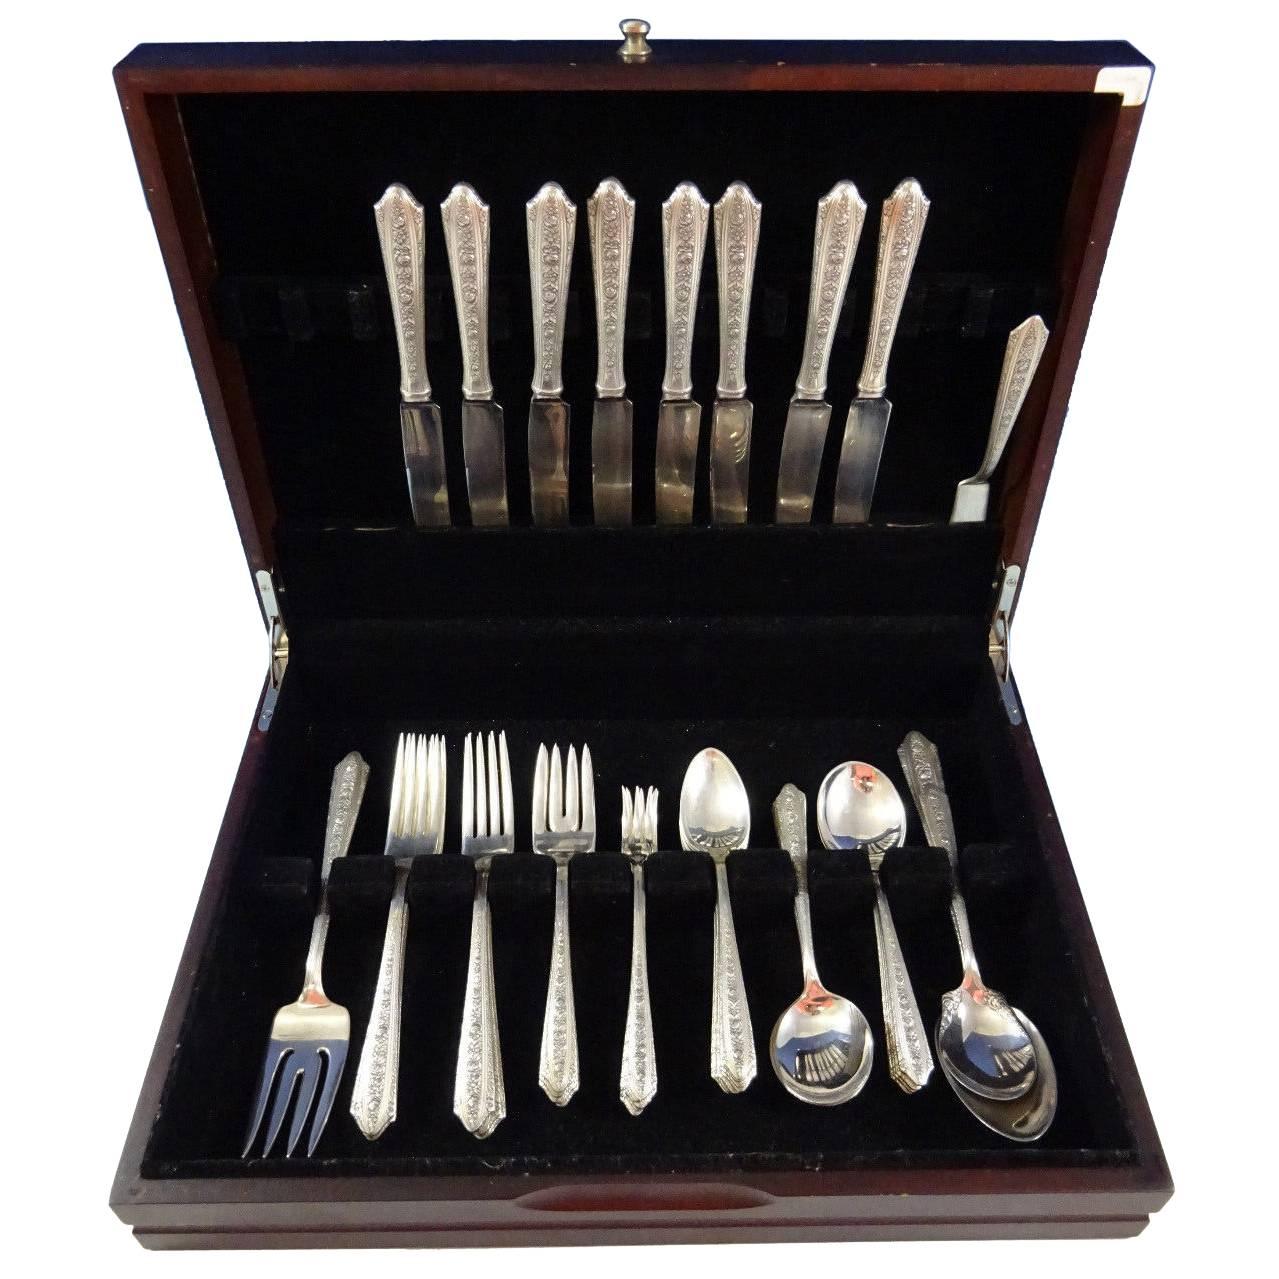 Beautiful Normandie by Wallace sterling silver flatware set, 52 pieces. This set includes:

Eight knives, 8 3/4